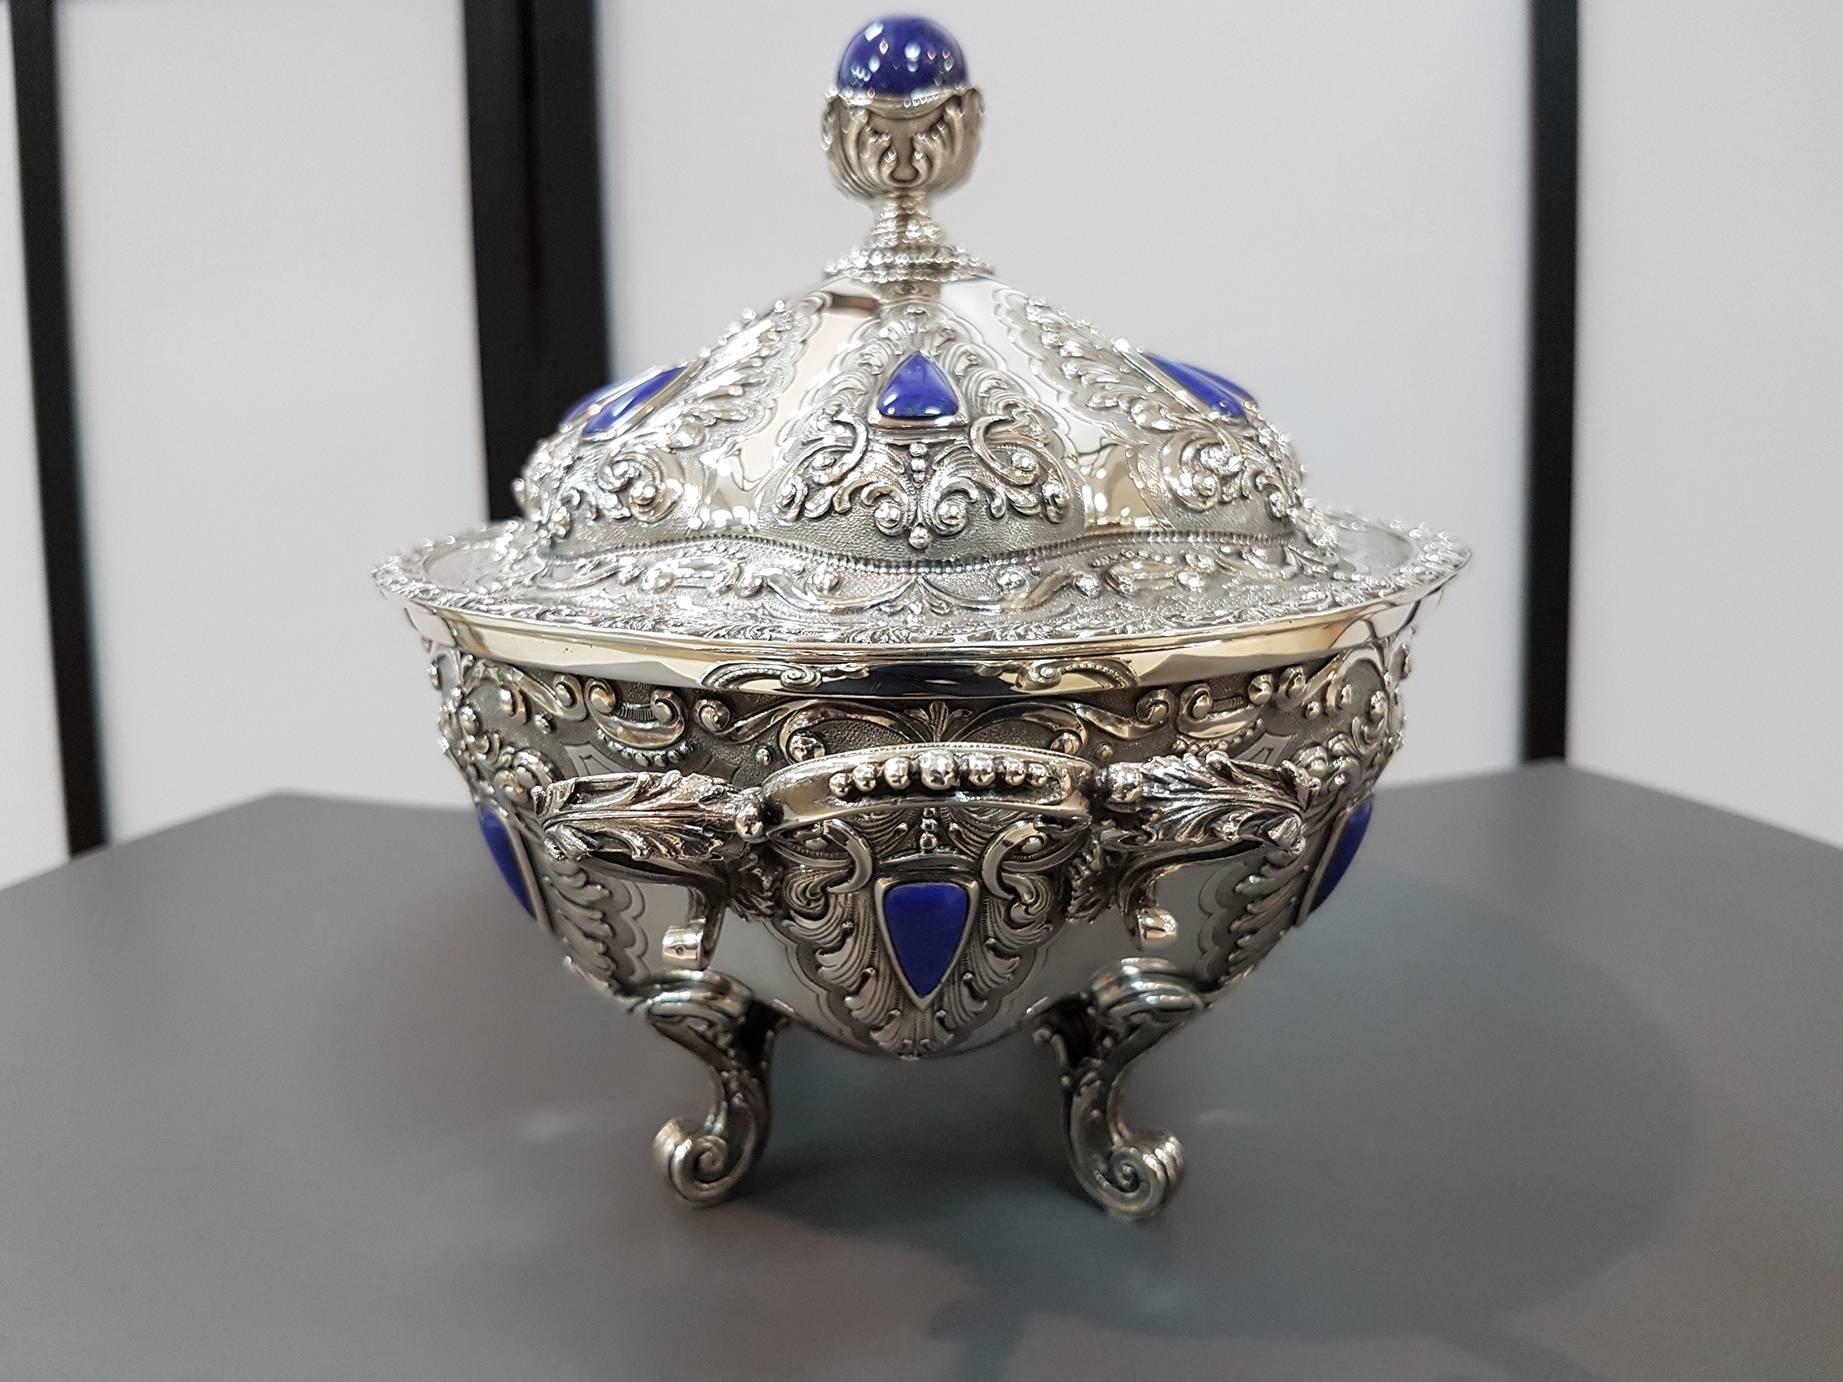 The tureen body is made from embossed, chiseled and engraved sliver sheet. The outer surface is further, artfully, embellished with lapislazuli. A great round lapislazuli encased in silver leaves acts as the lid grip.
The tureen lining is